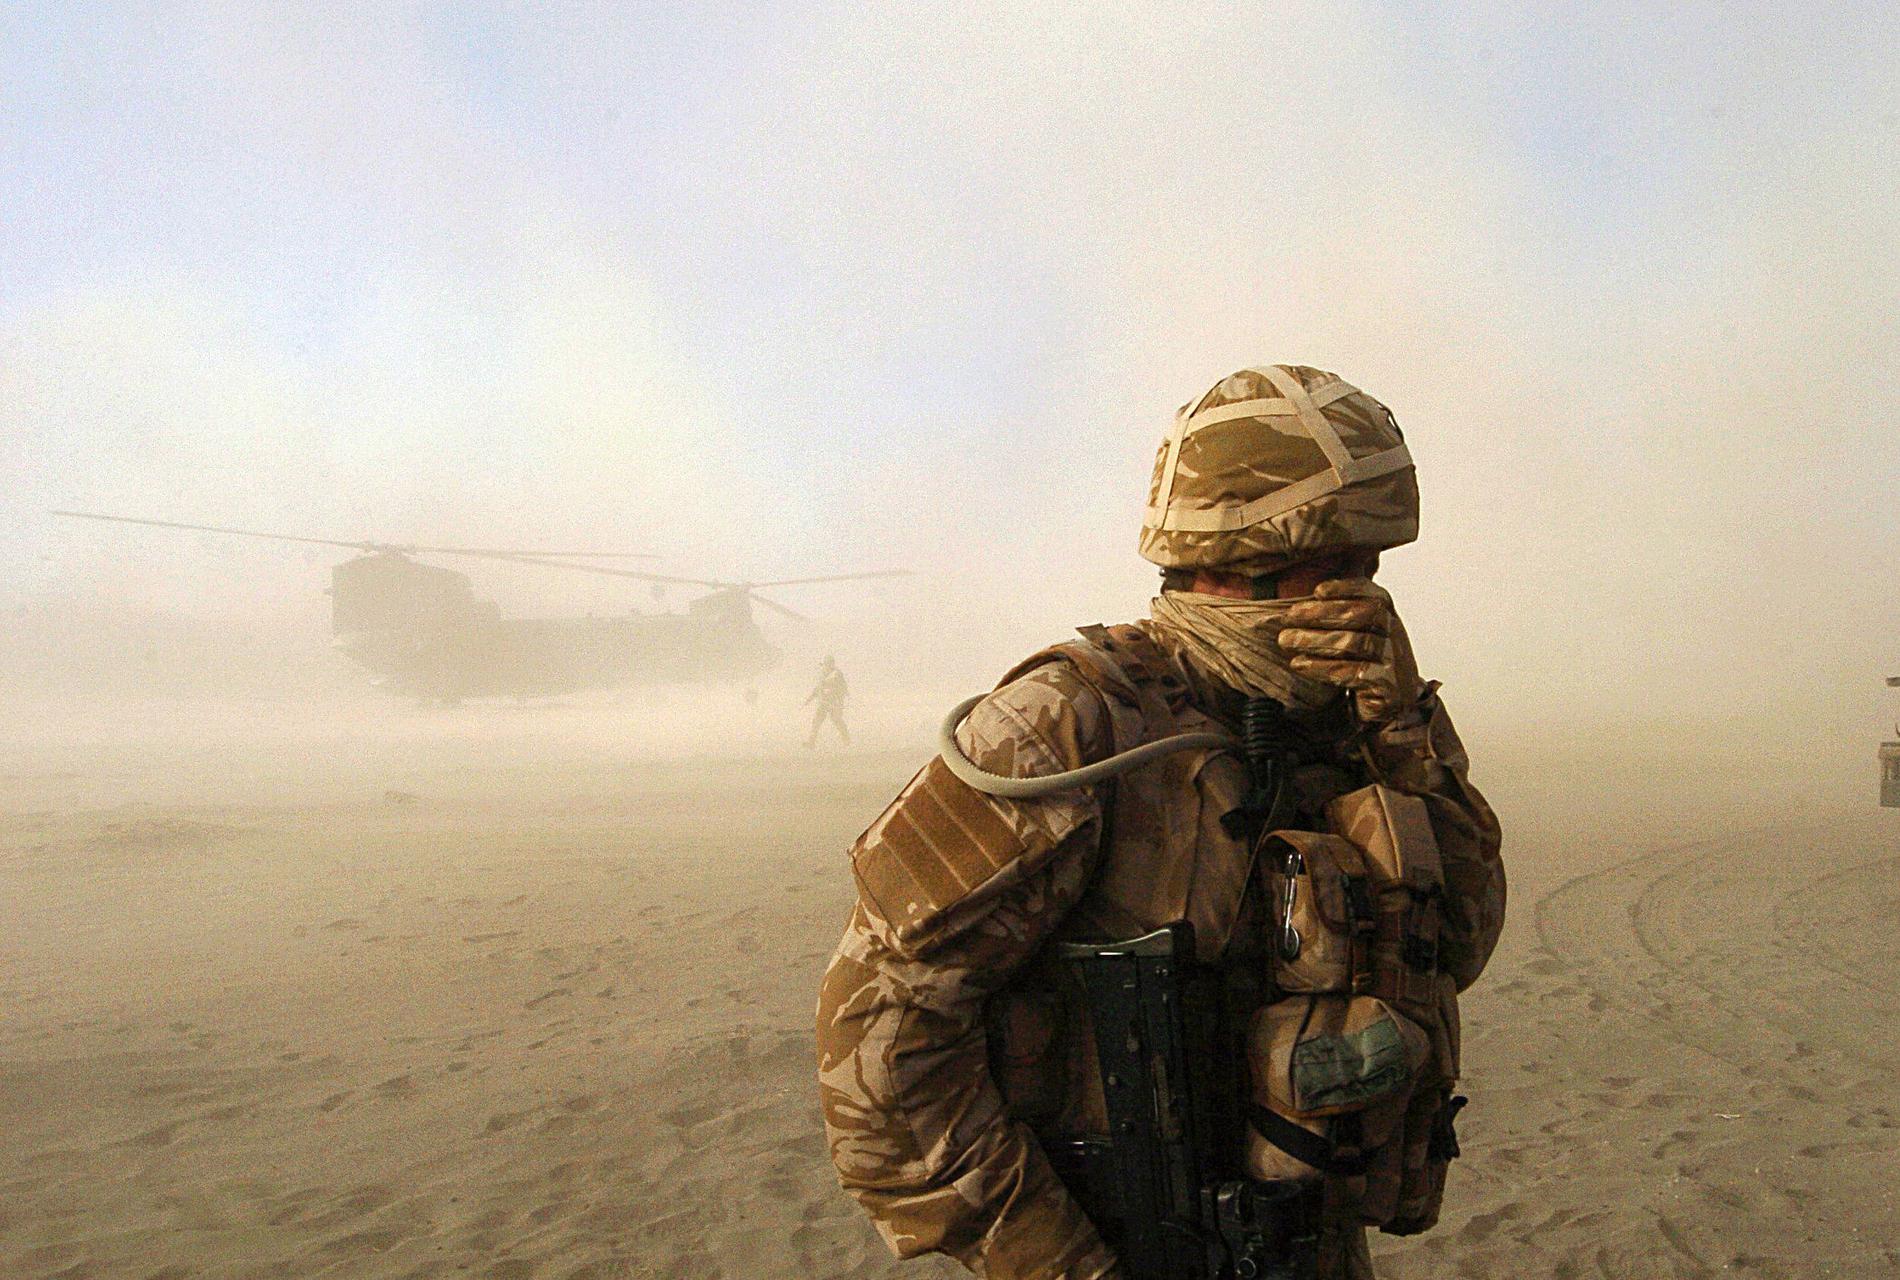 BBC reveal revealed soldiers competed to kill most Afghans – VG